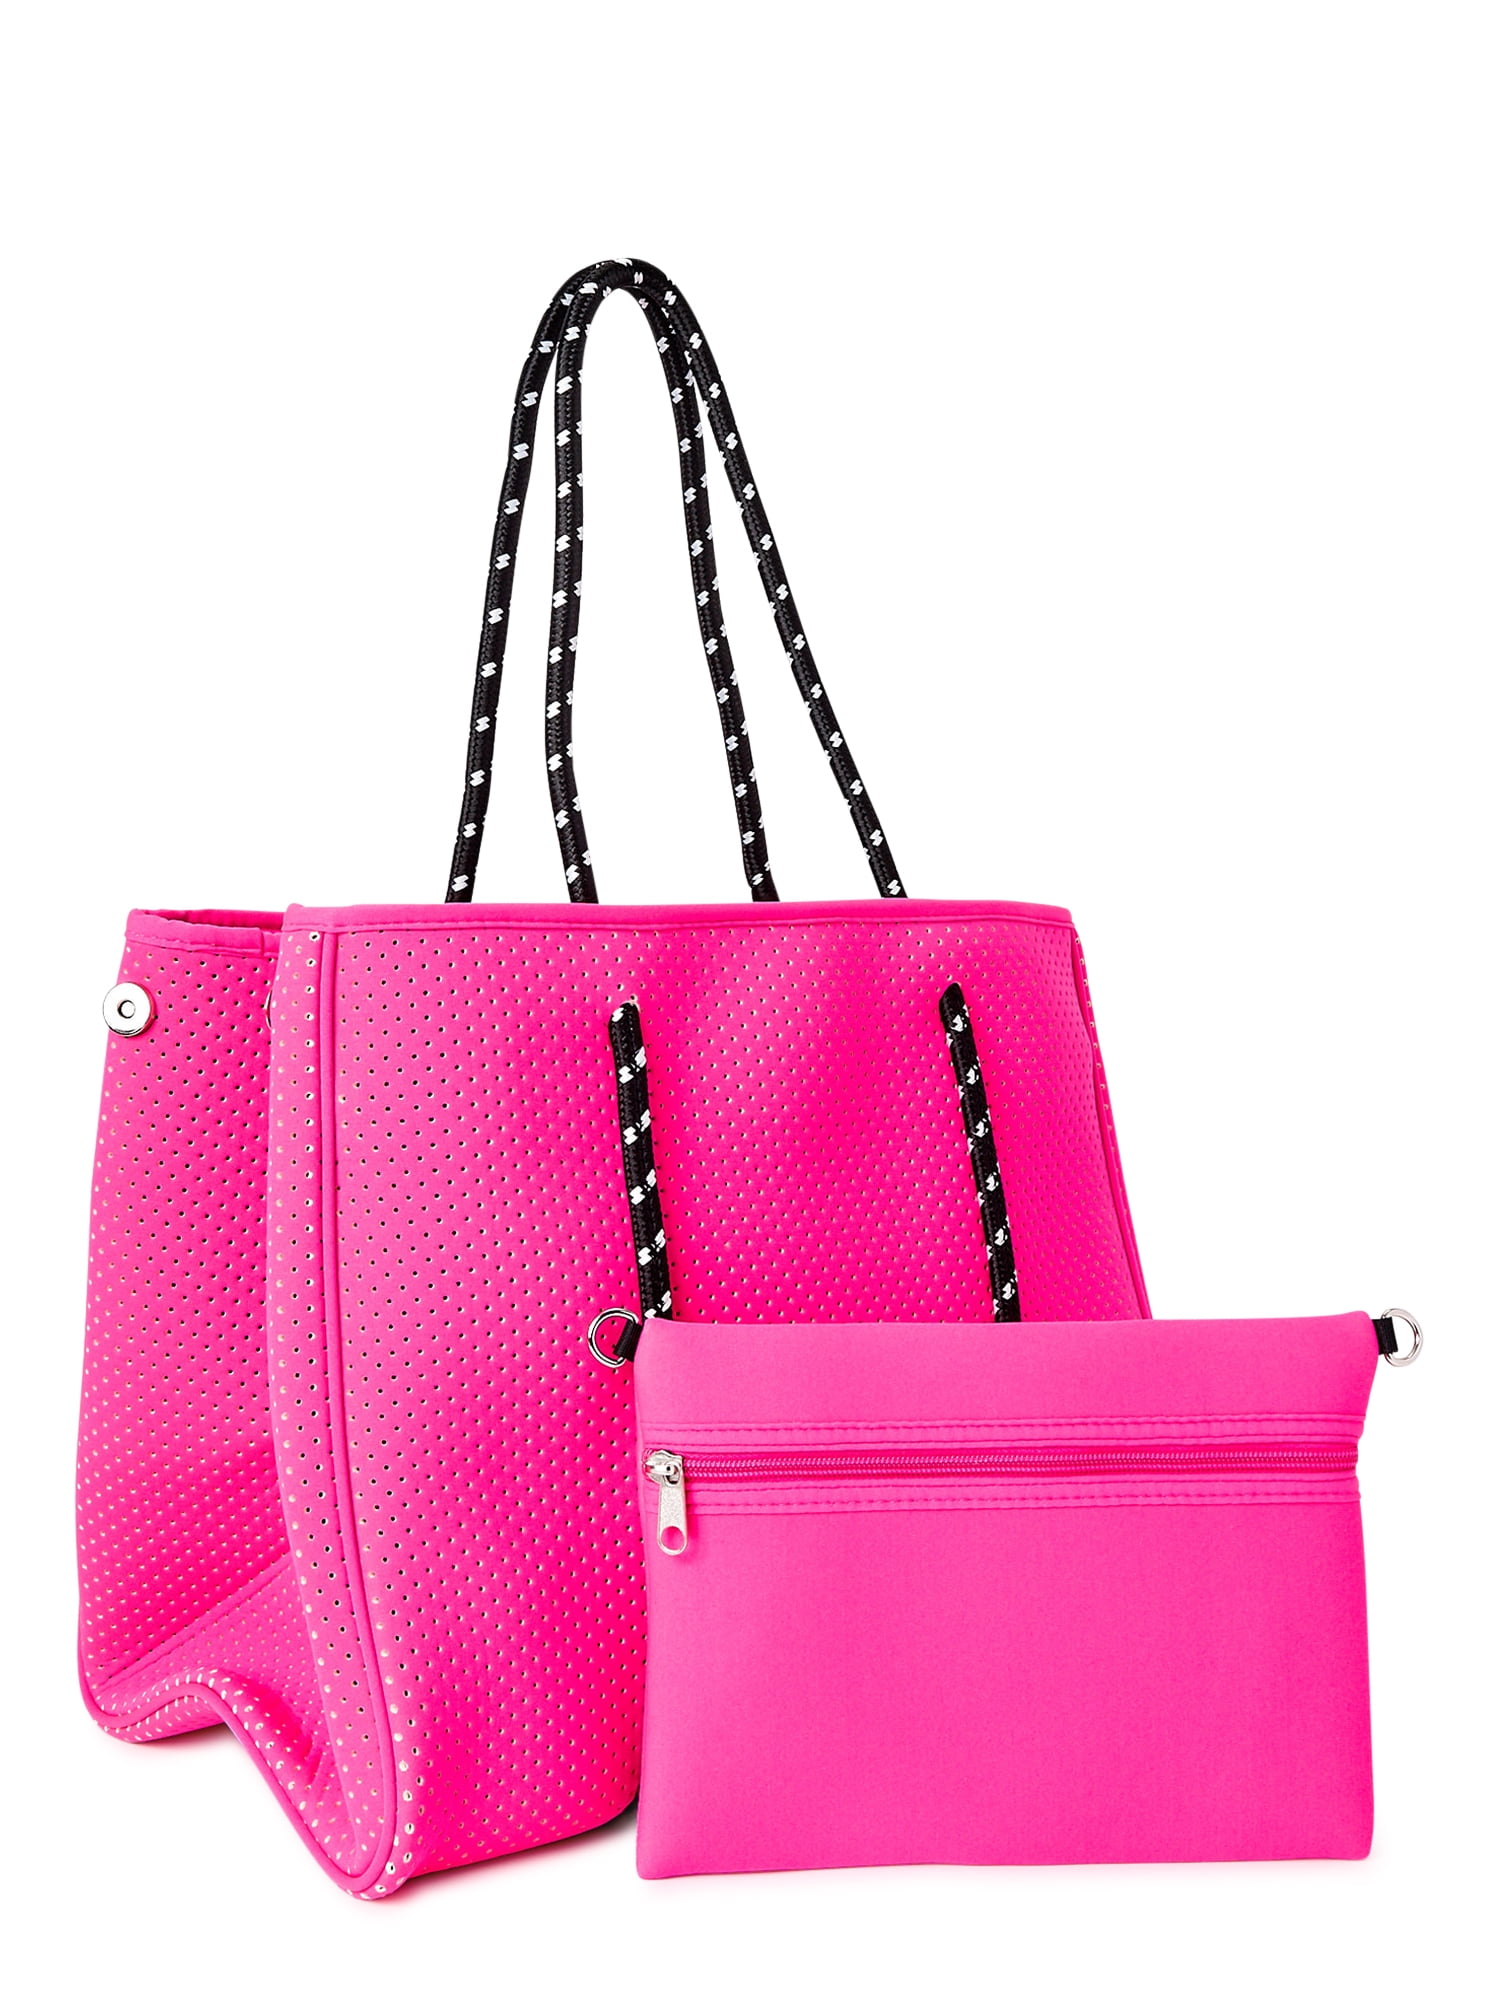 WHY NEOPRENE TOTES MAKE THE PERFECT BAGS FOR MOMS – ADORNME